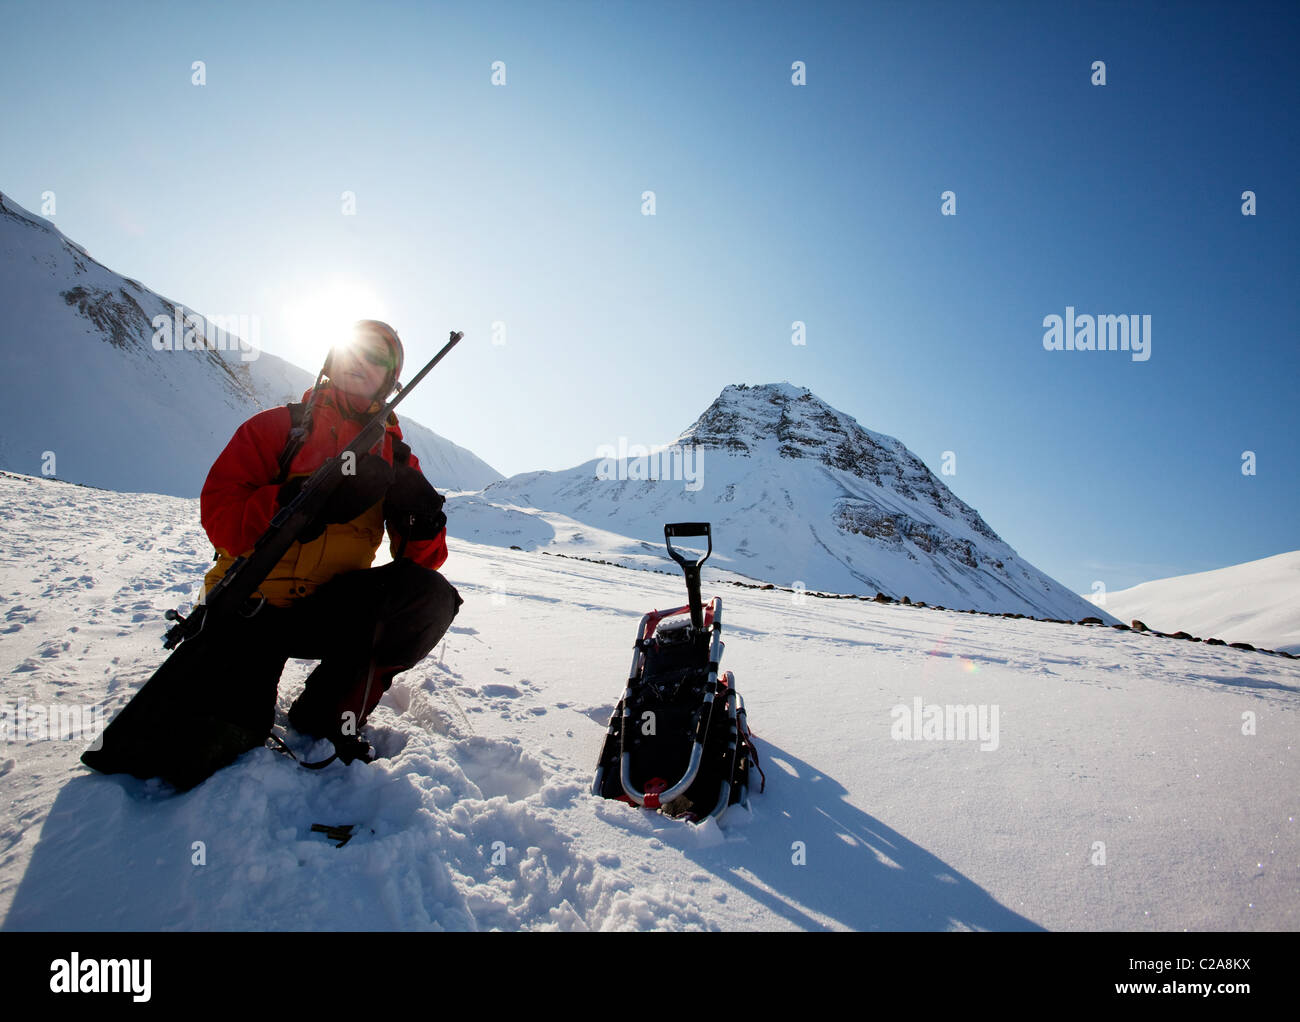 A female adventure loading a rifle as a safety precatuion, Svalbard, Norway Stock Photo